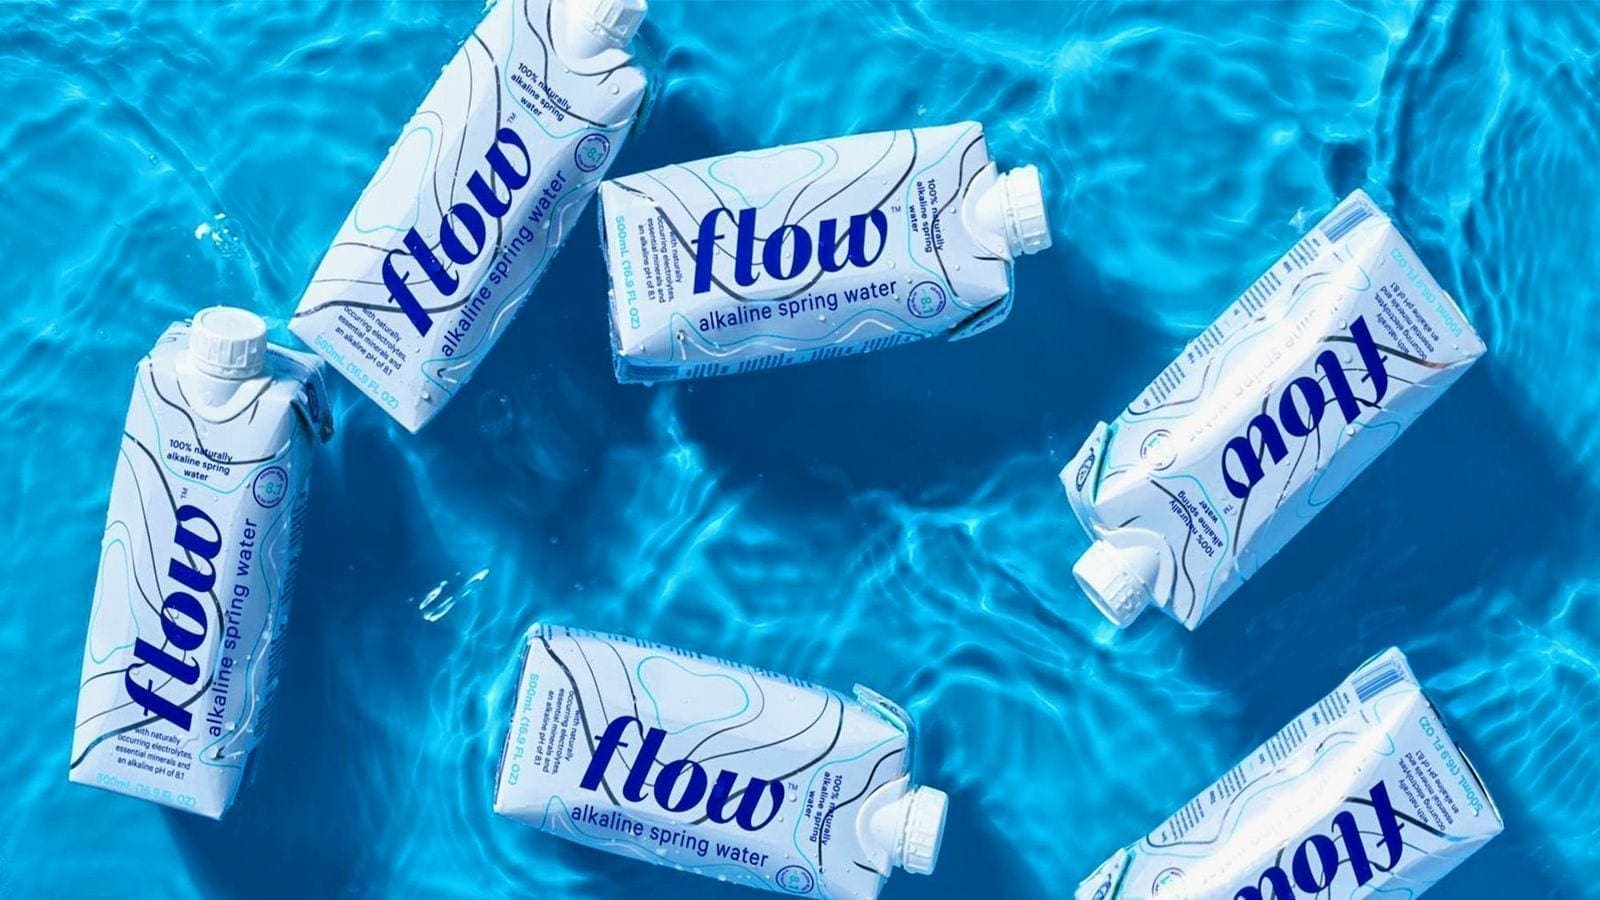 Flow Alkaline Spring Water secures investment from Virgo Investment Group to expand distribution channel